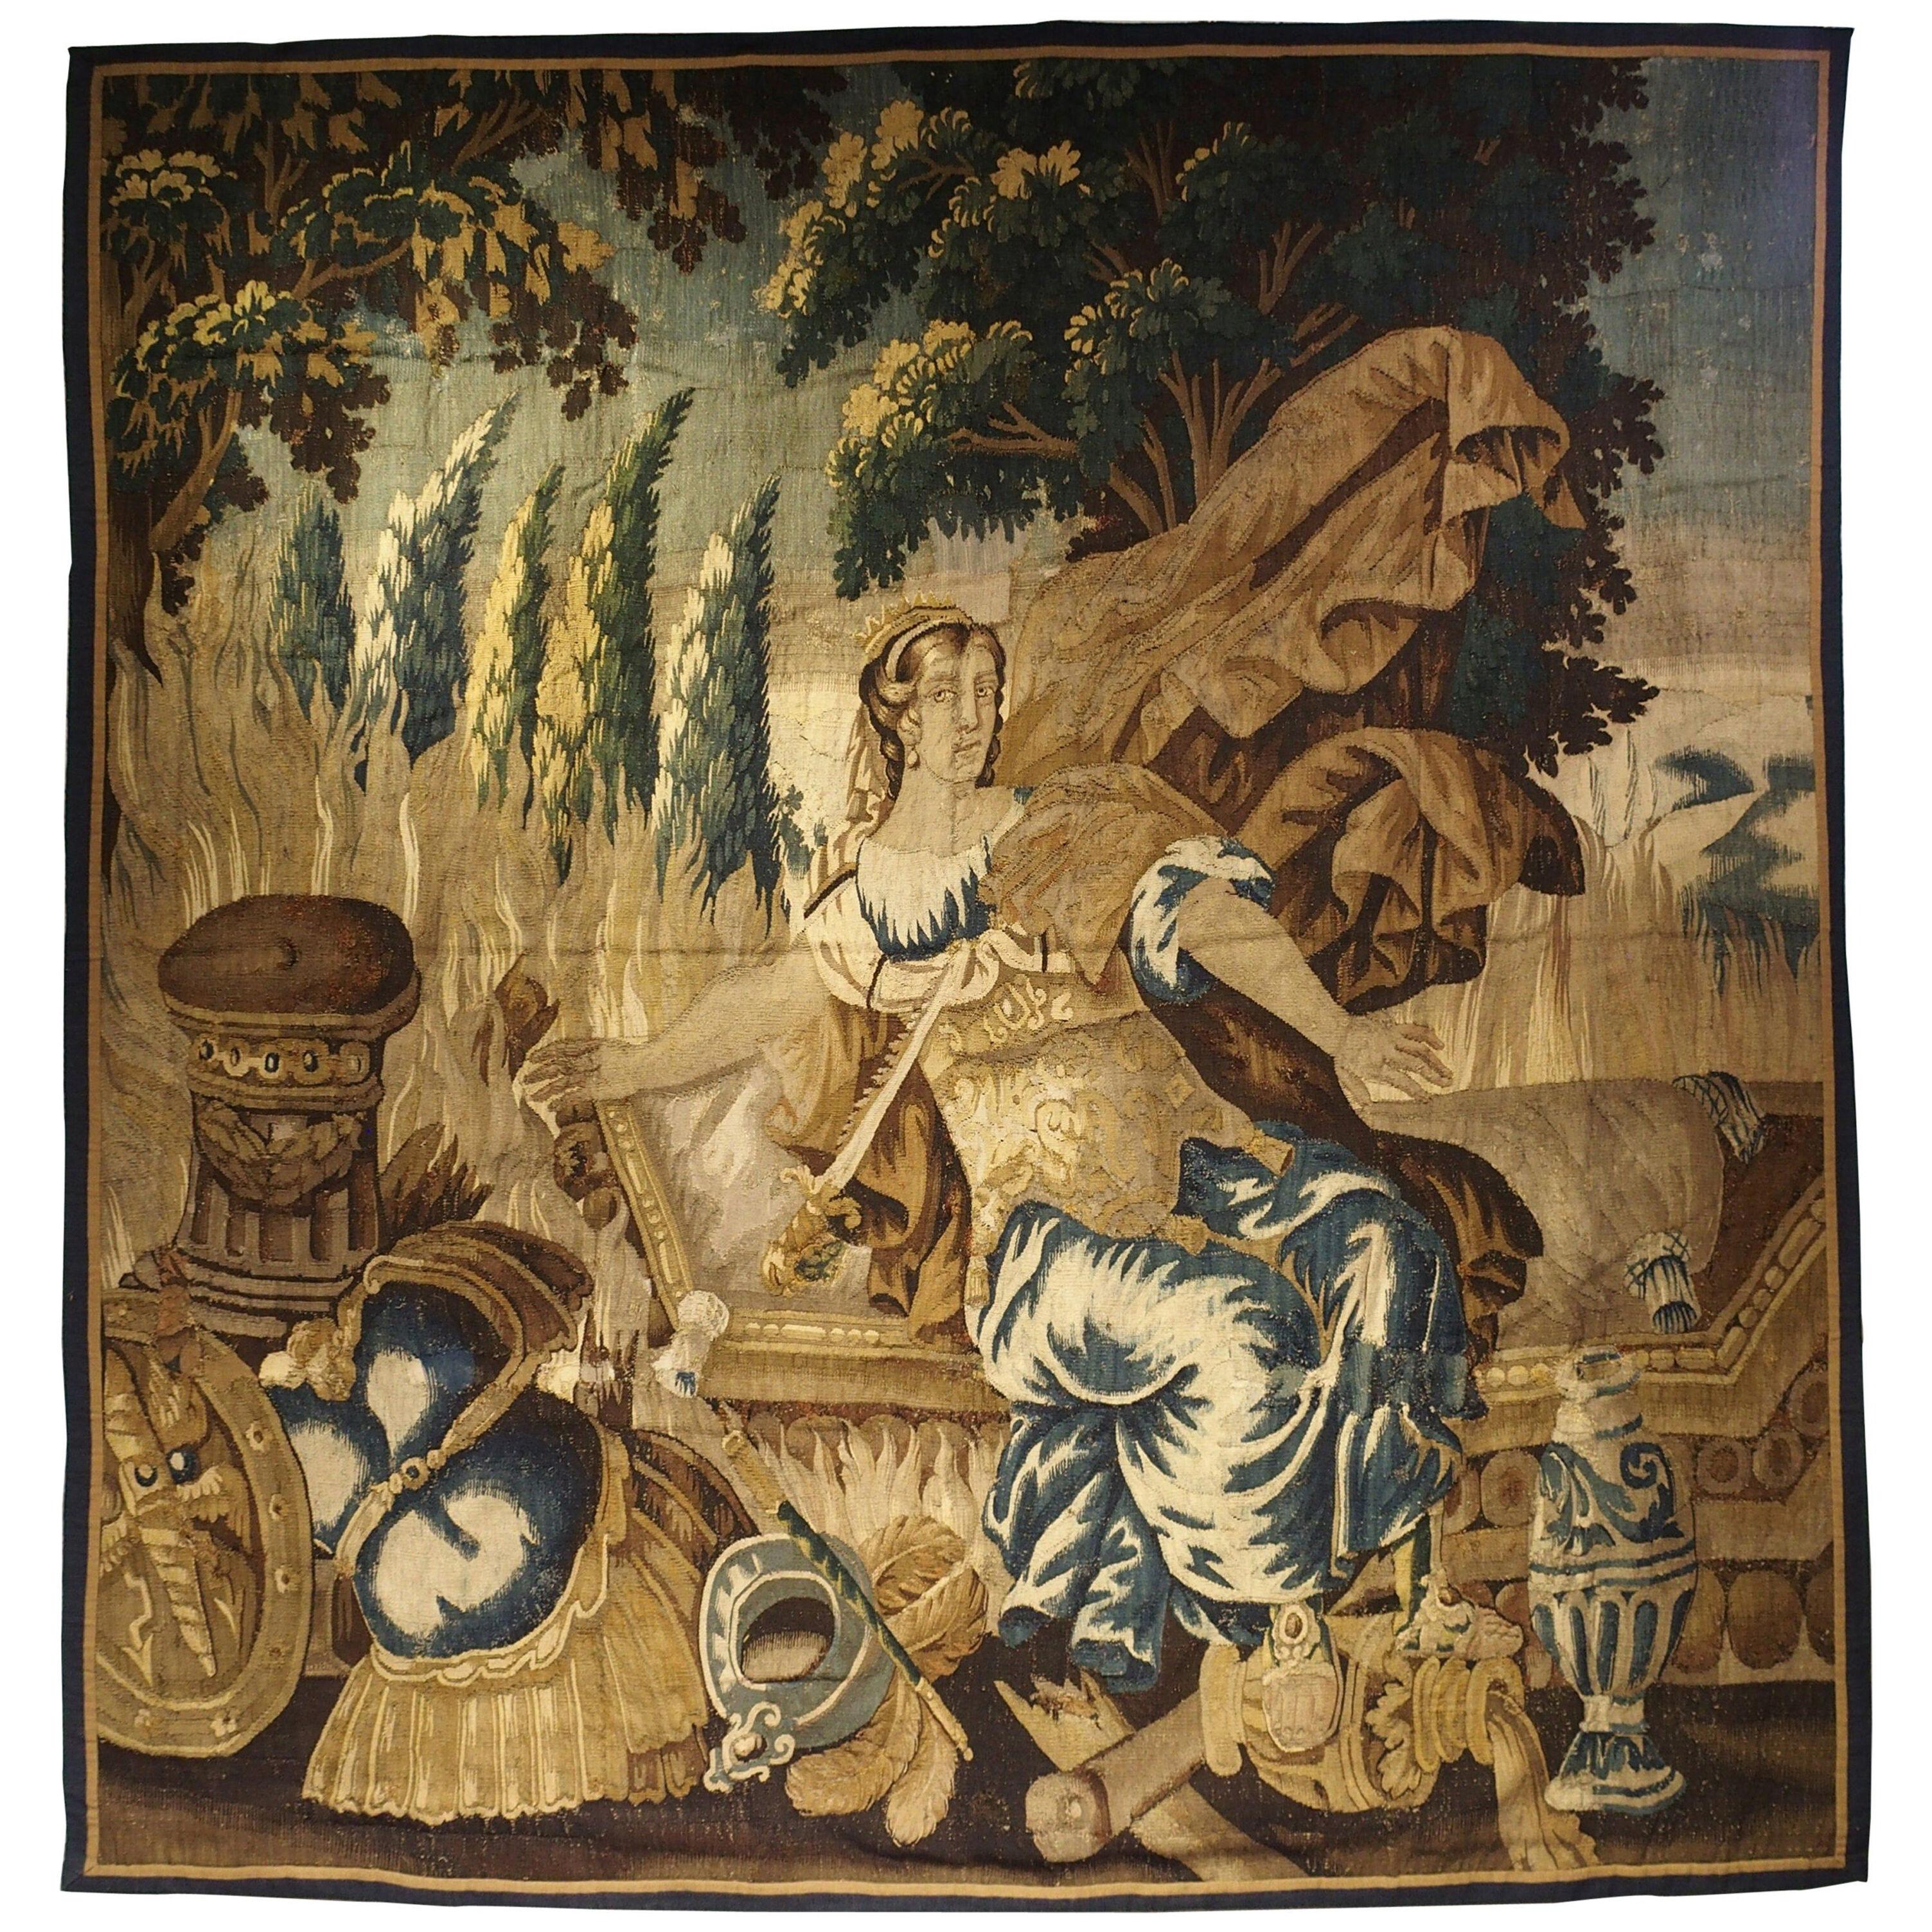 Antique Aubusson Tapestry from the Late 1600s, Goddess Pax or Eirene